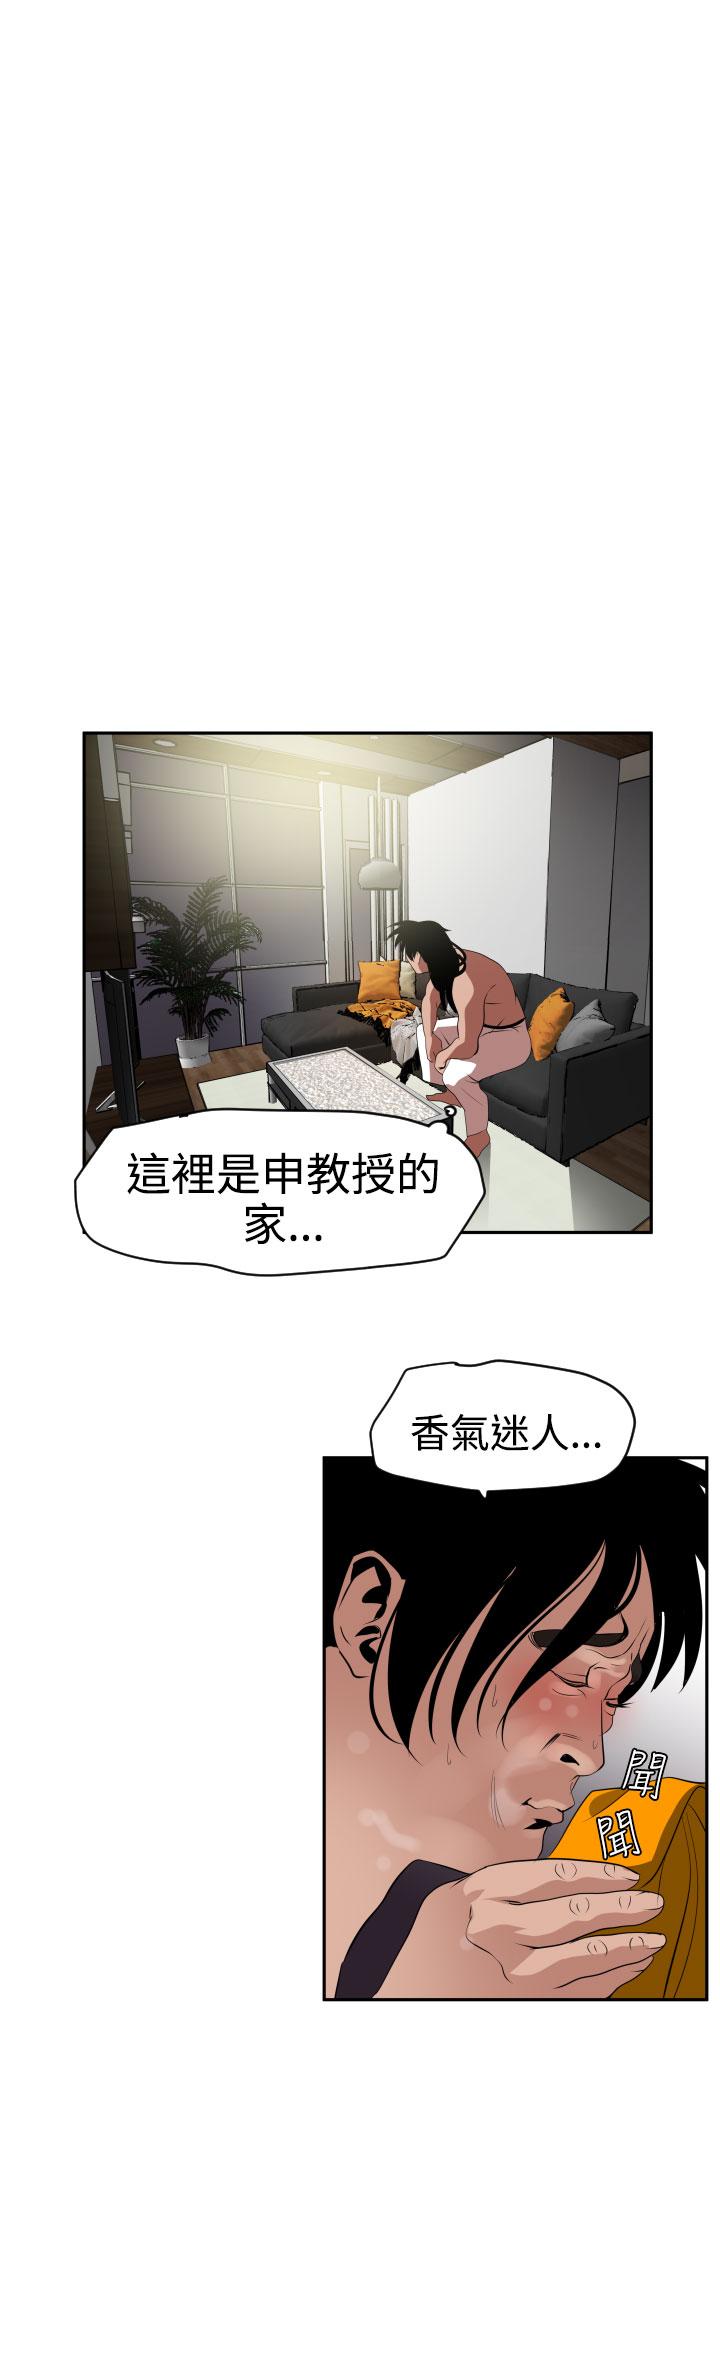 Desire King (慾求王) Ch.1-16 (chinese) 445